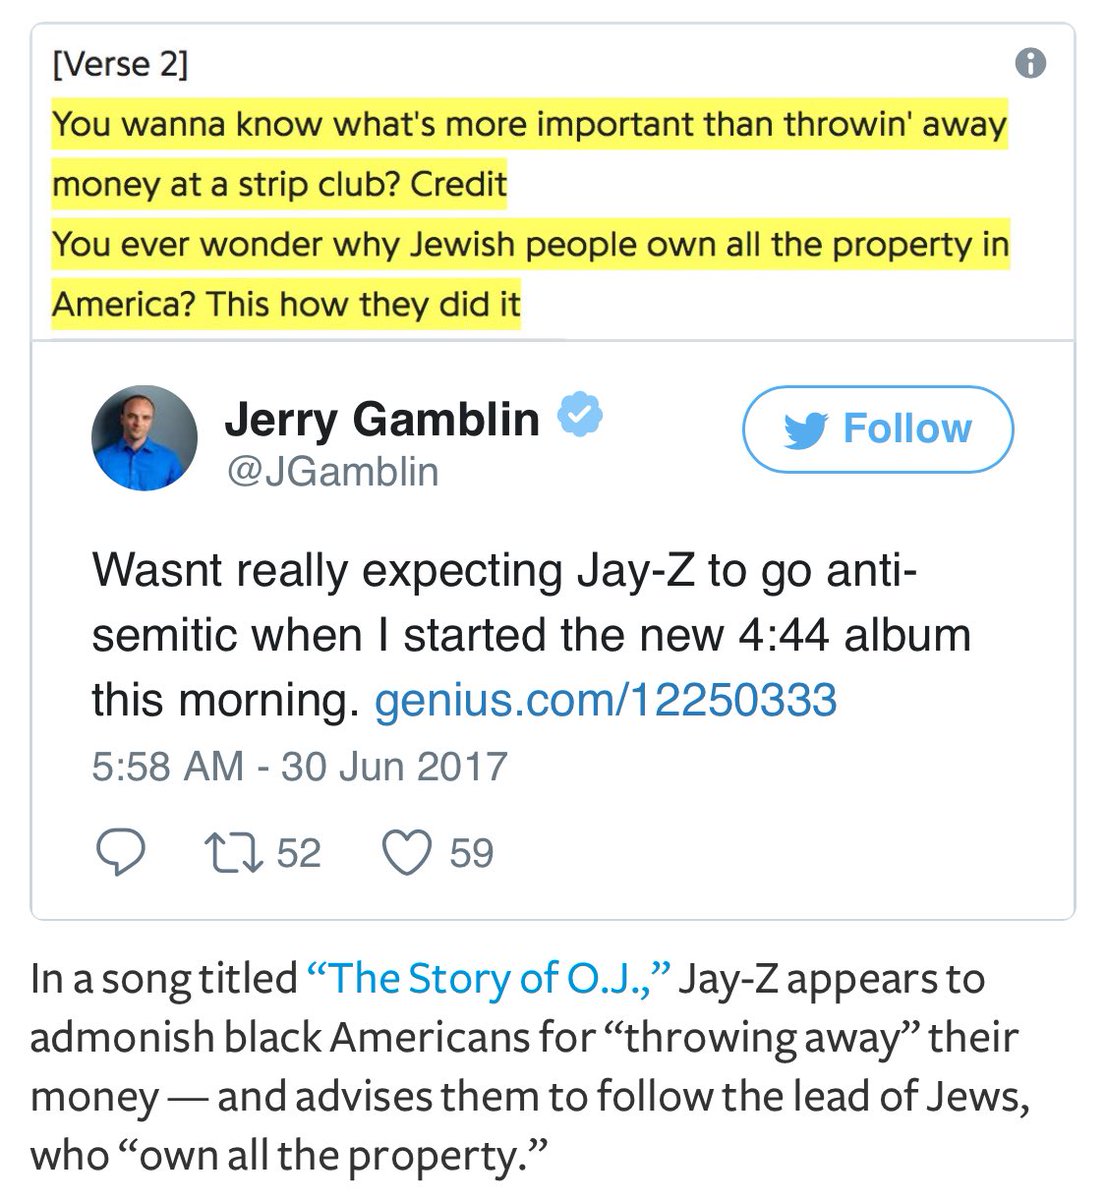 web page - Verse 2 You wanna know what's more important than throwin' away money at a strip club? Credit You ever wonder why Jewish people own all the property in America? This how they did it Jerry Gamblin Wasnt really expecting JayZ to go anti semitic w